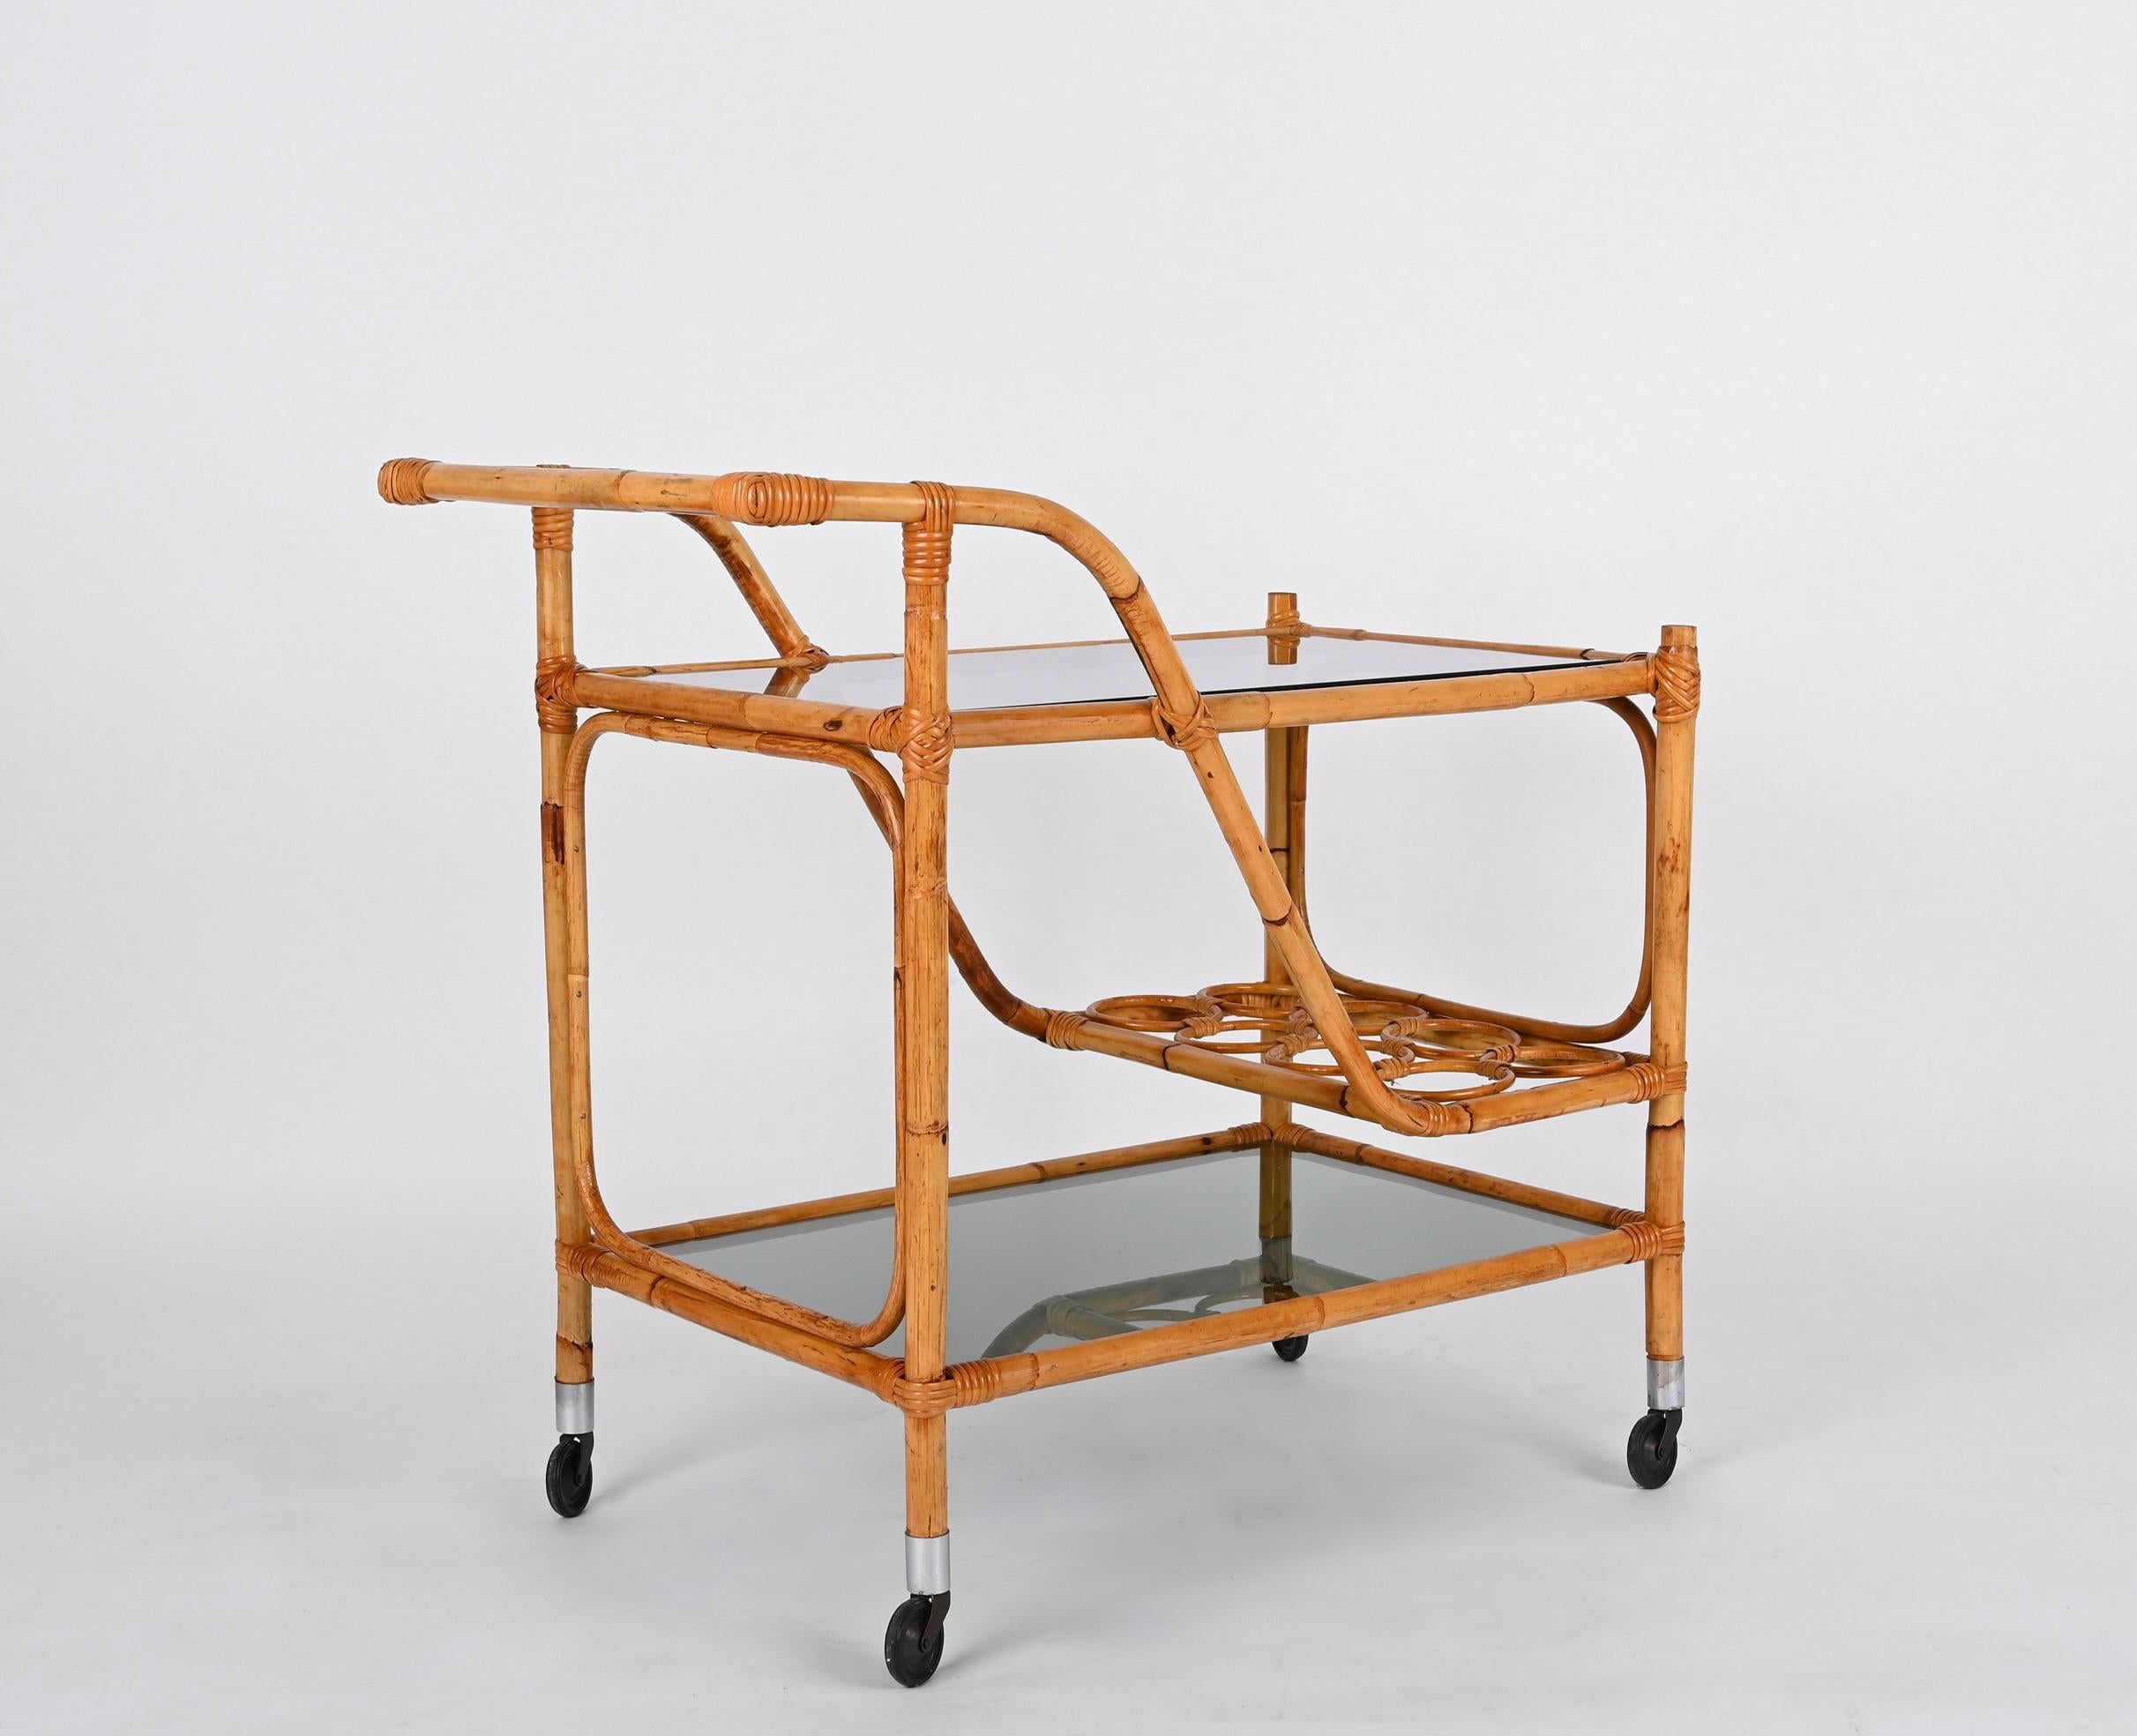 Gorgeous mid-century rectangular bamboo cane and rattan bar cart with two smoked glass shelves and metal wheels. This unique piece was produced in Italy during the 1960s.

A wonderful piece in fantastic vintage condition, with eight bottle holders